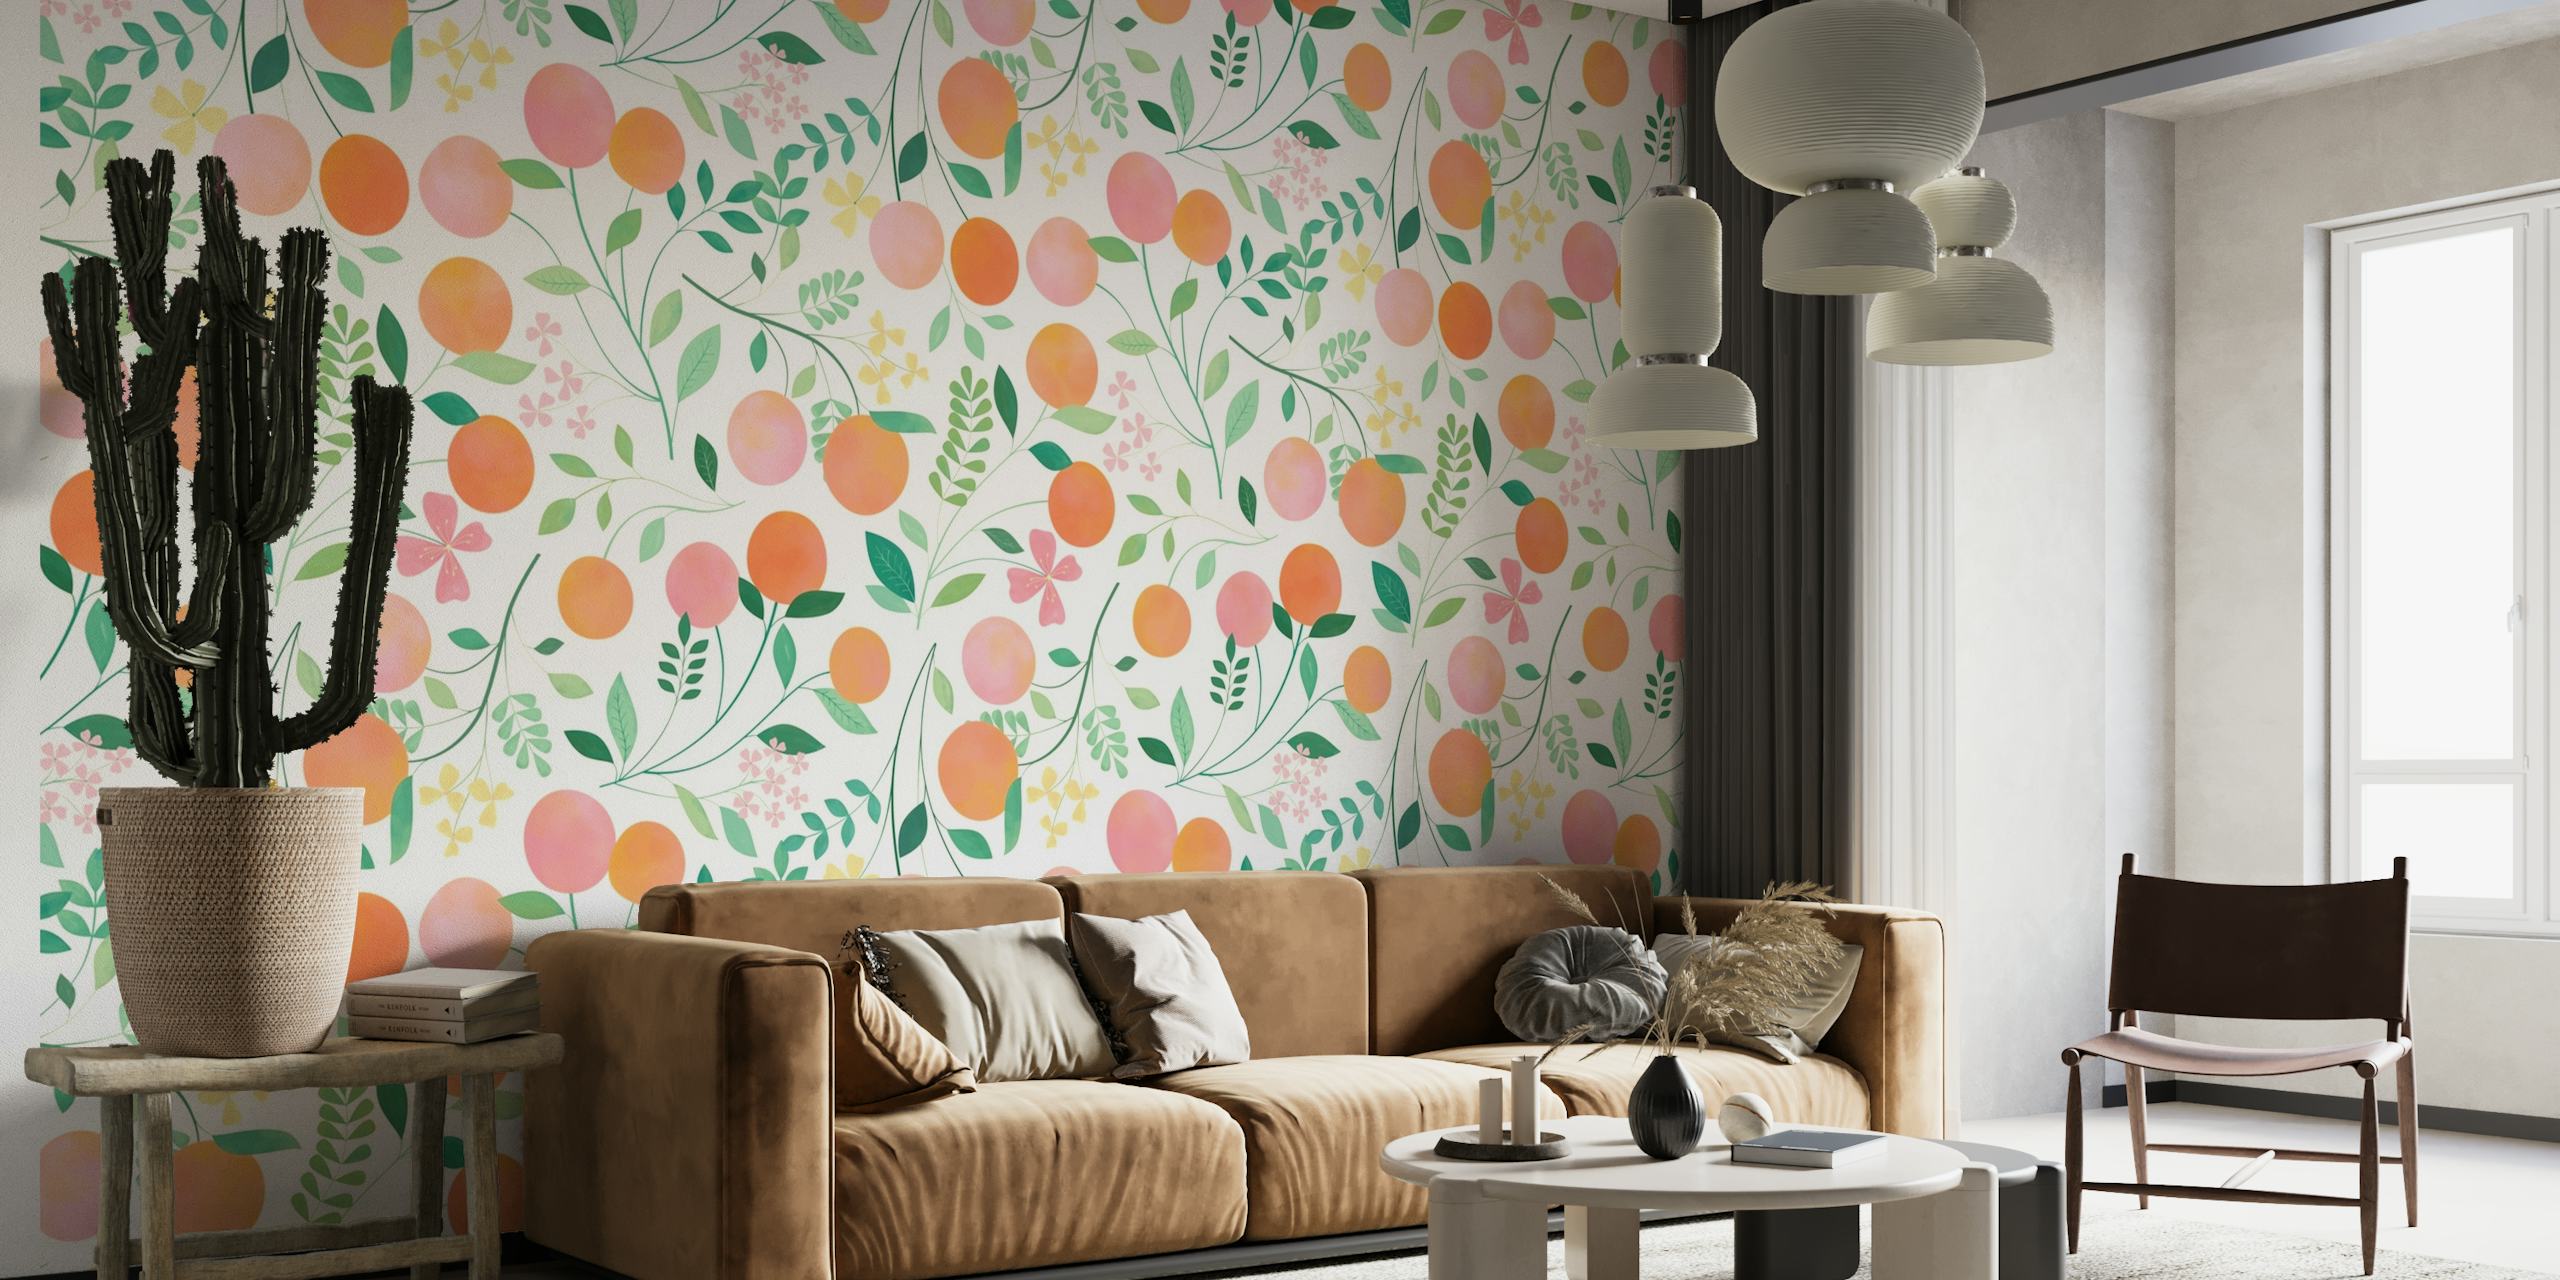 Stylized peaches and leaves wall mural on a vanilla background